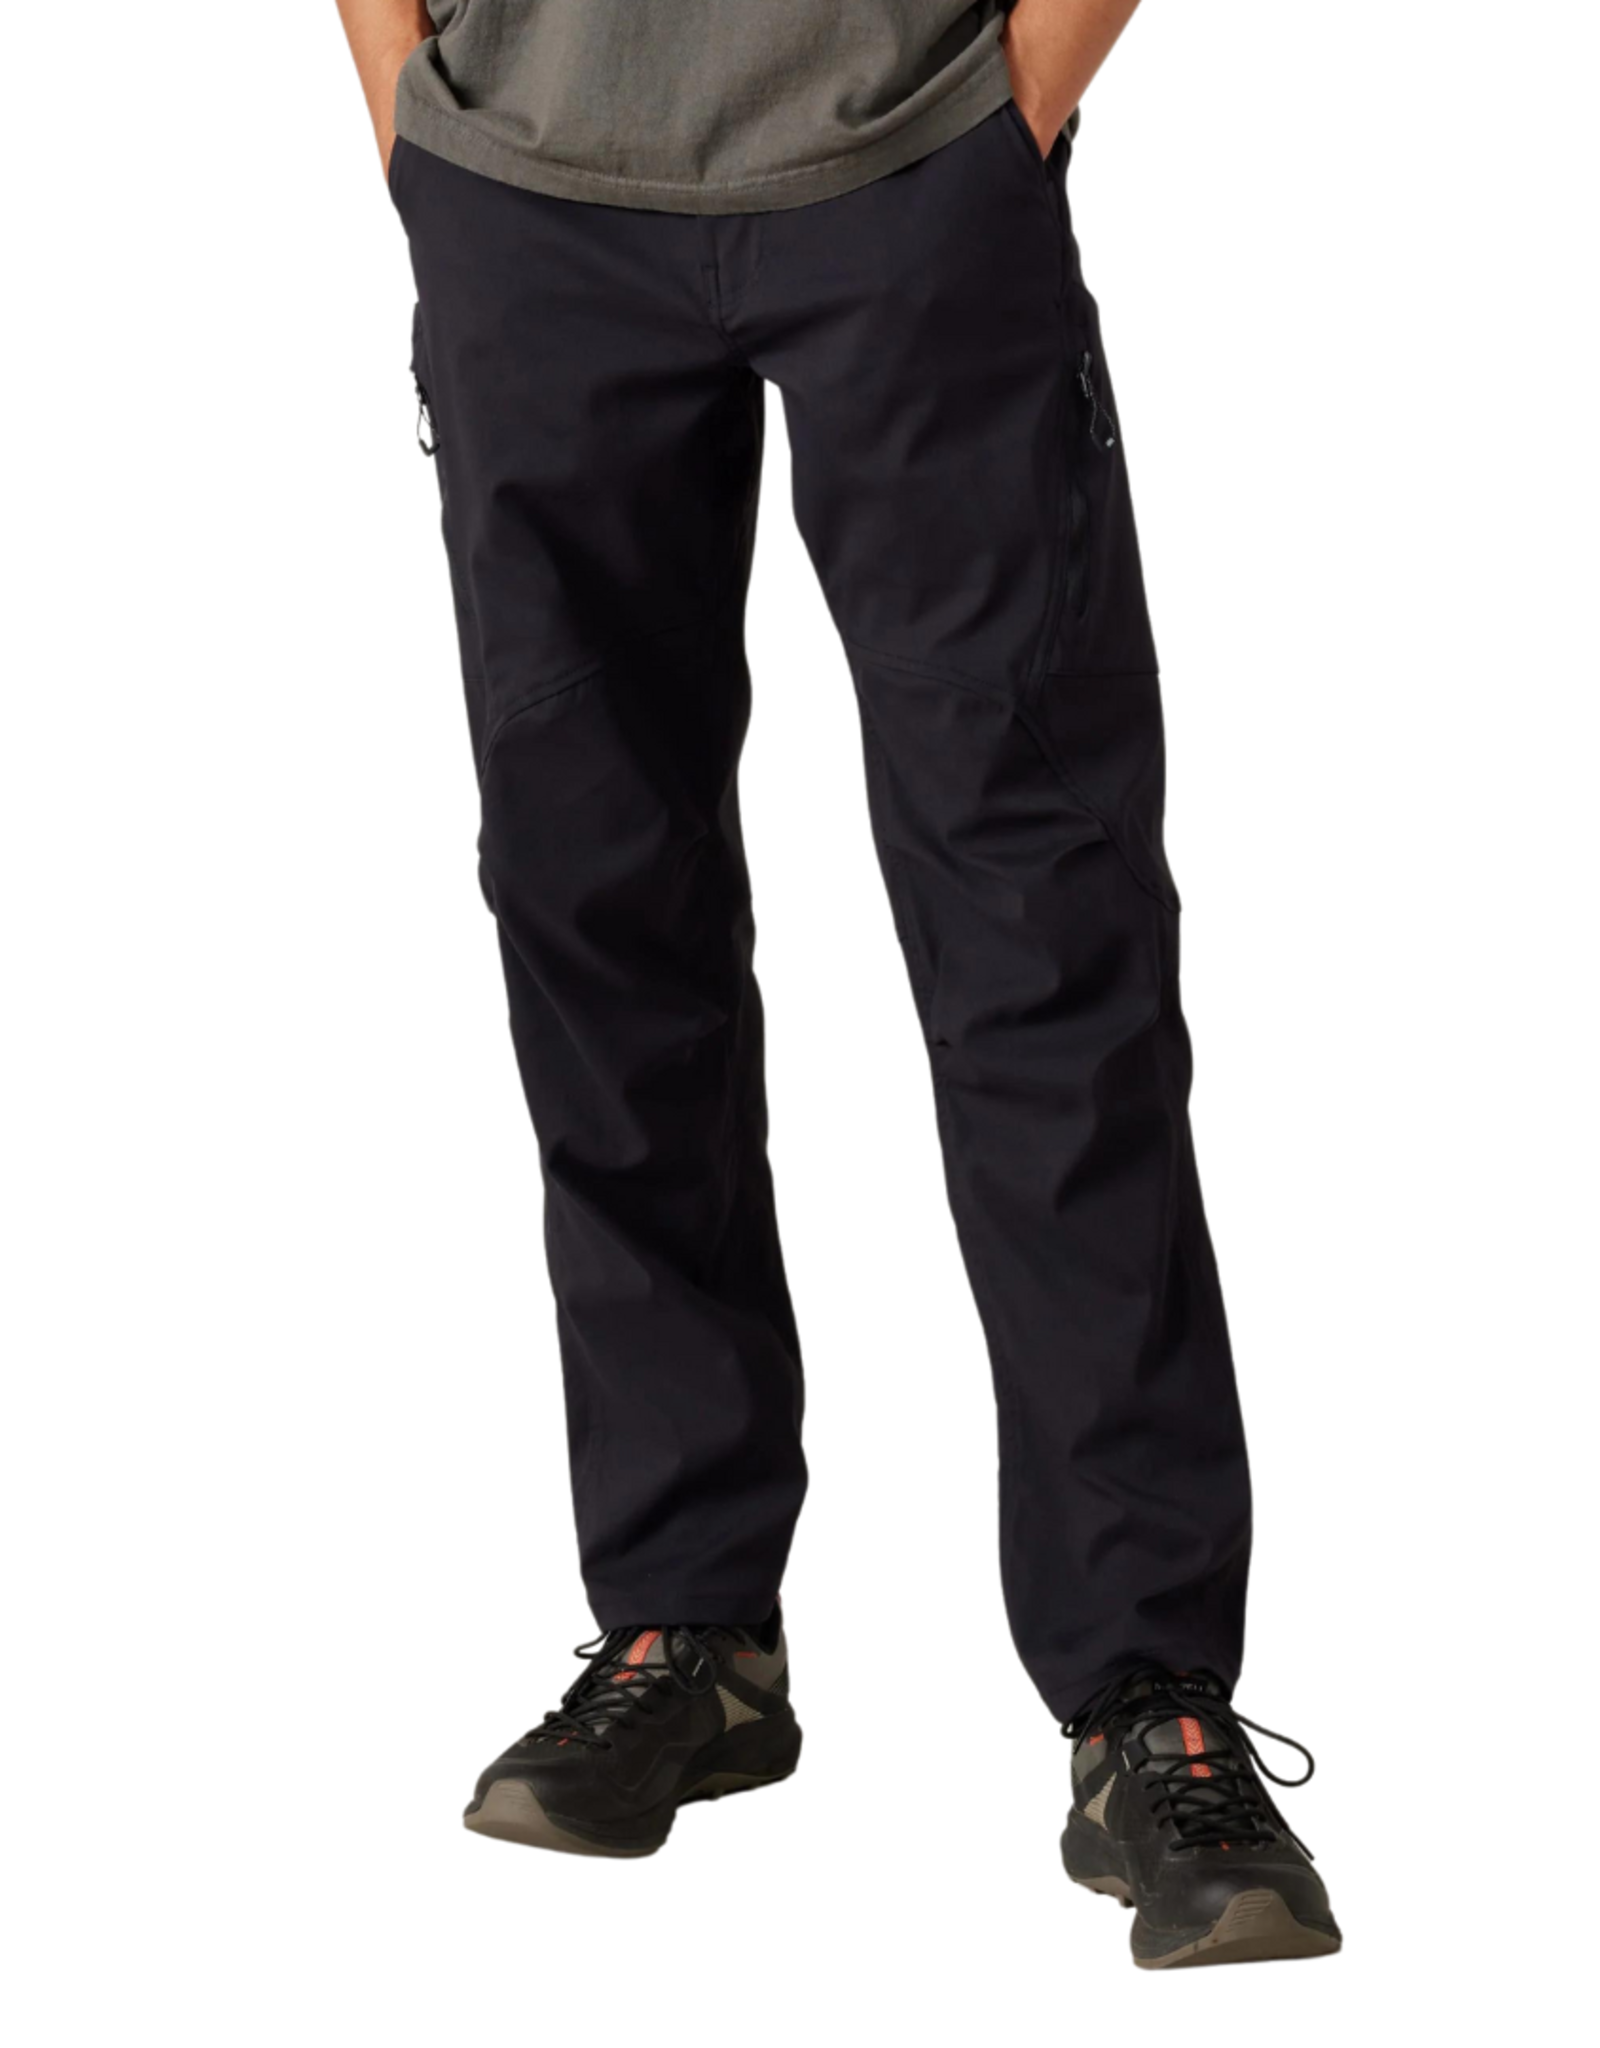 686 OUTERWEAR 686 - MENS ANYTHING CARGO PANT - RELAXED